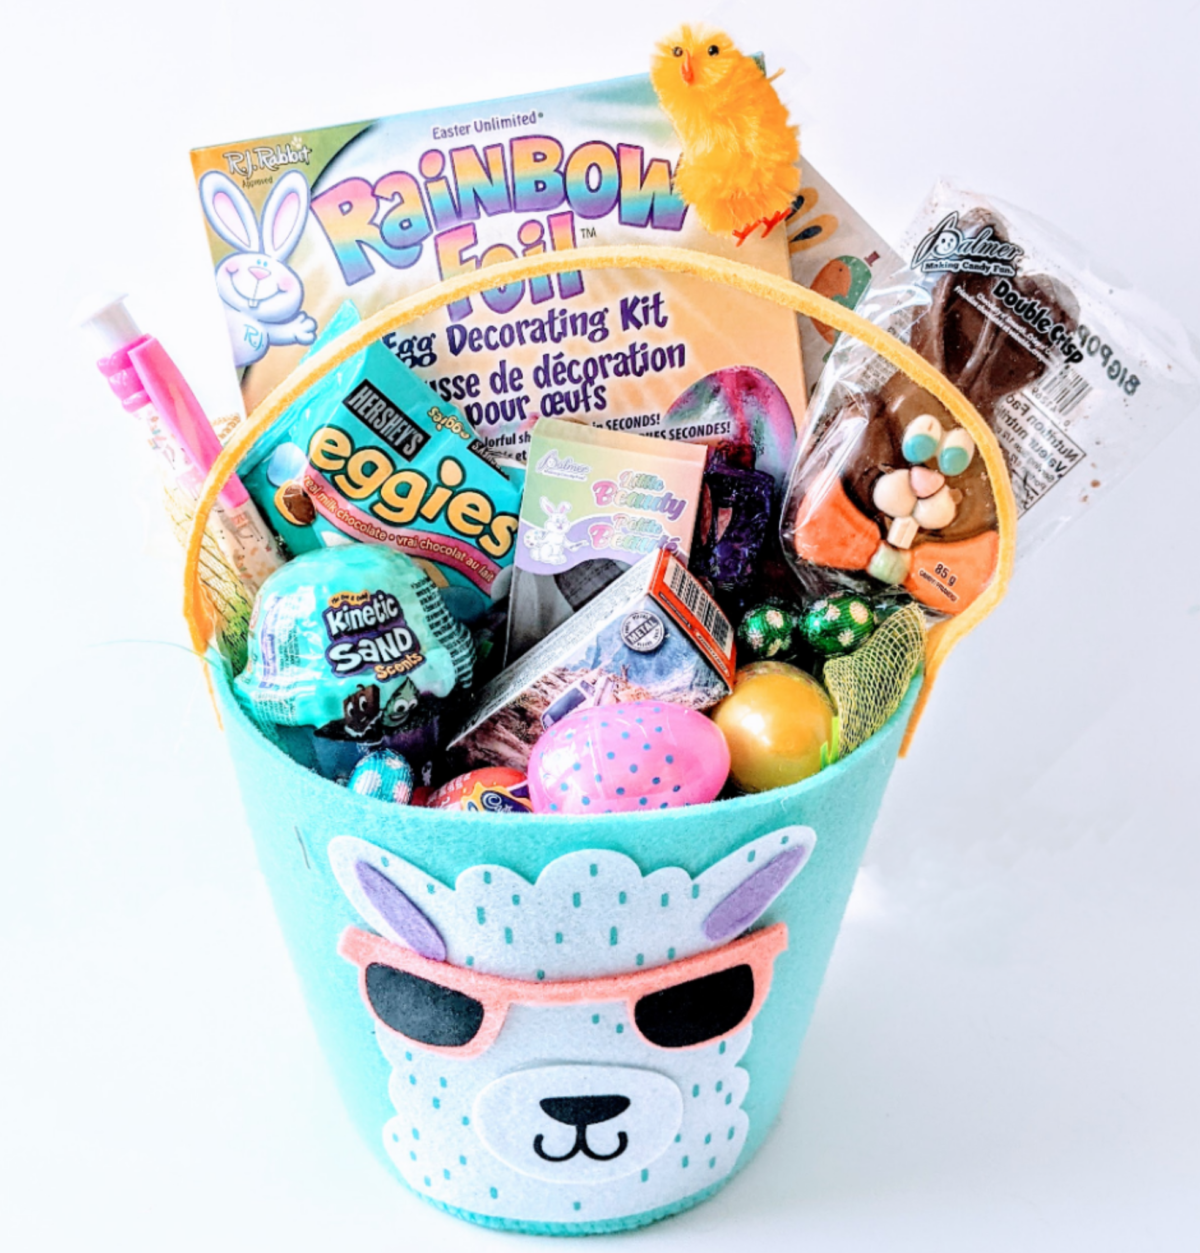 Easter gift baskets for the kids. Easter hunt gift baskets the kids will love.